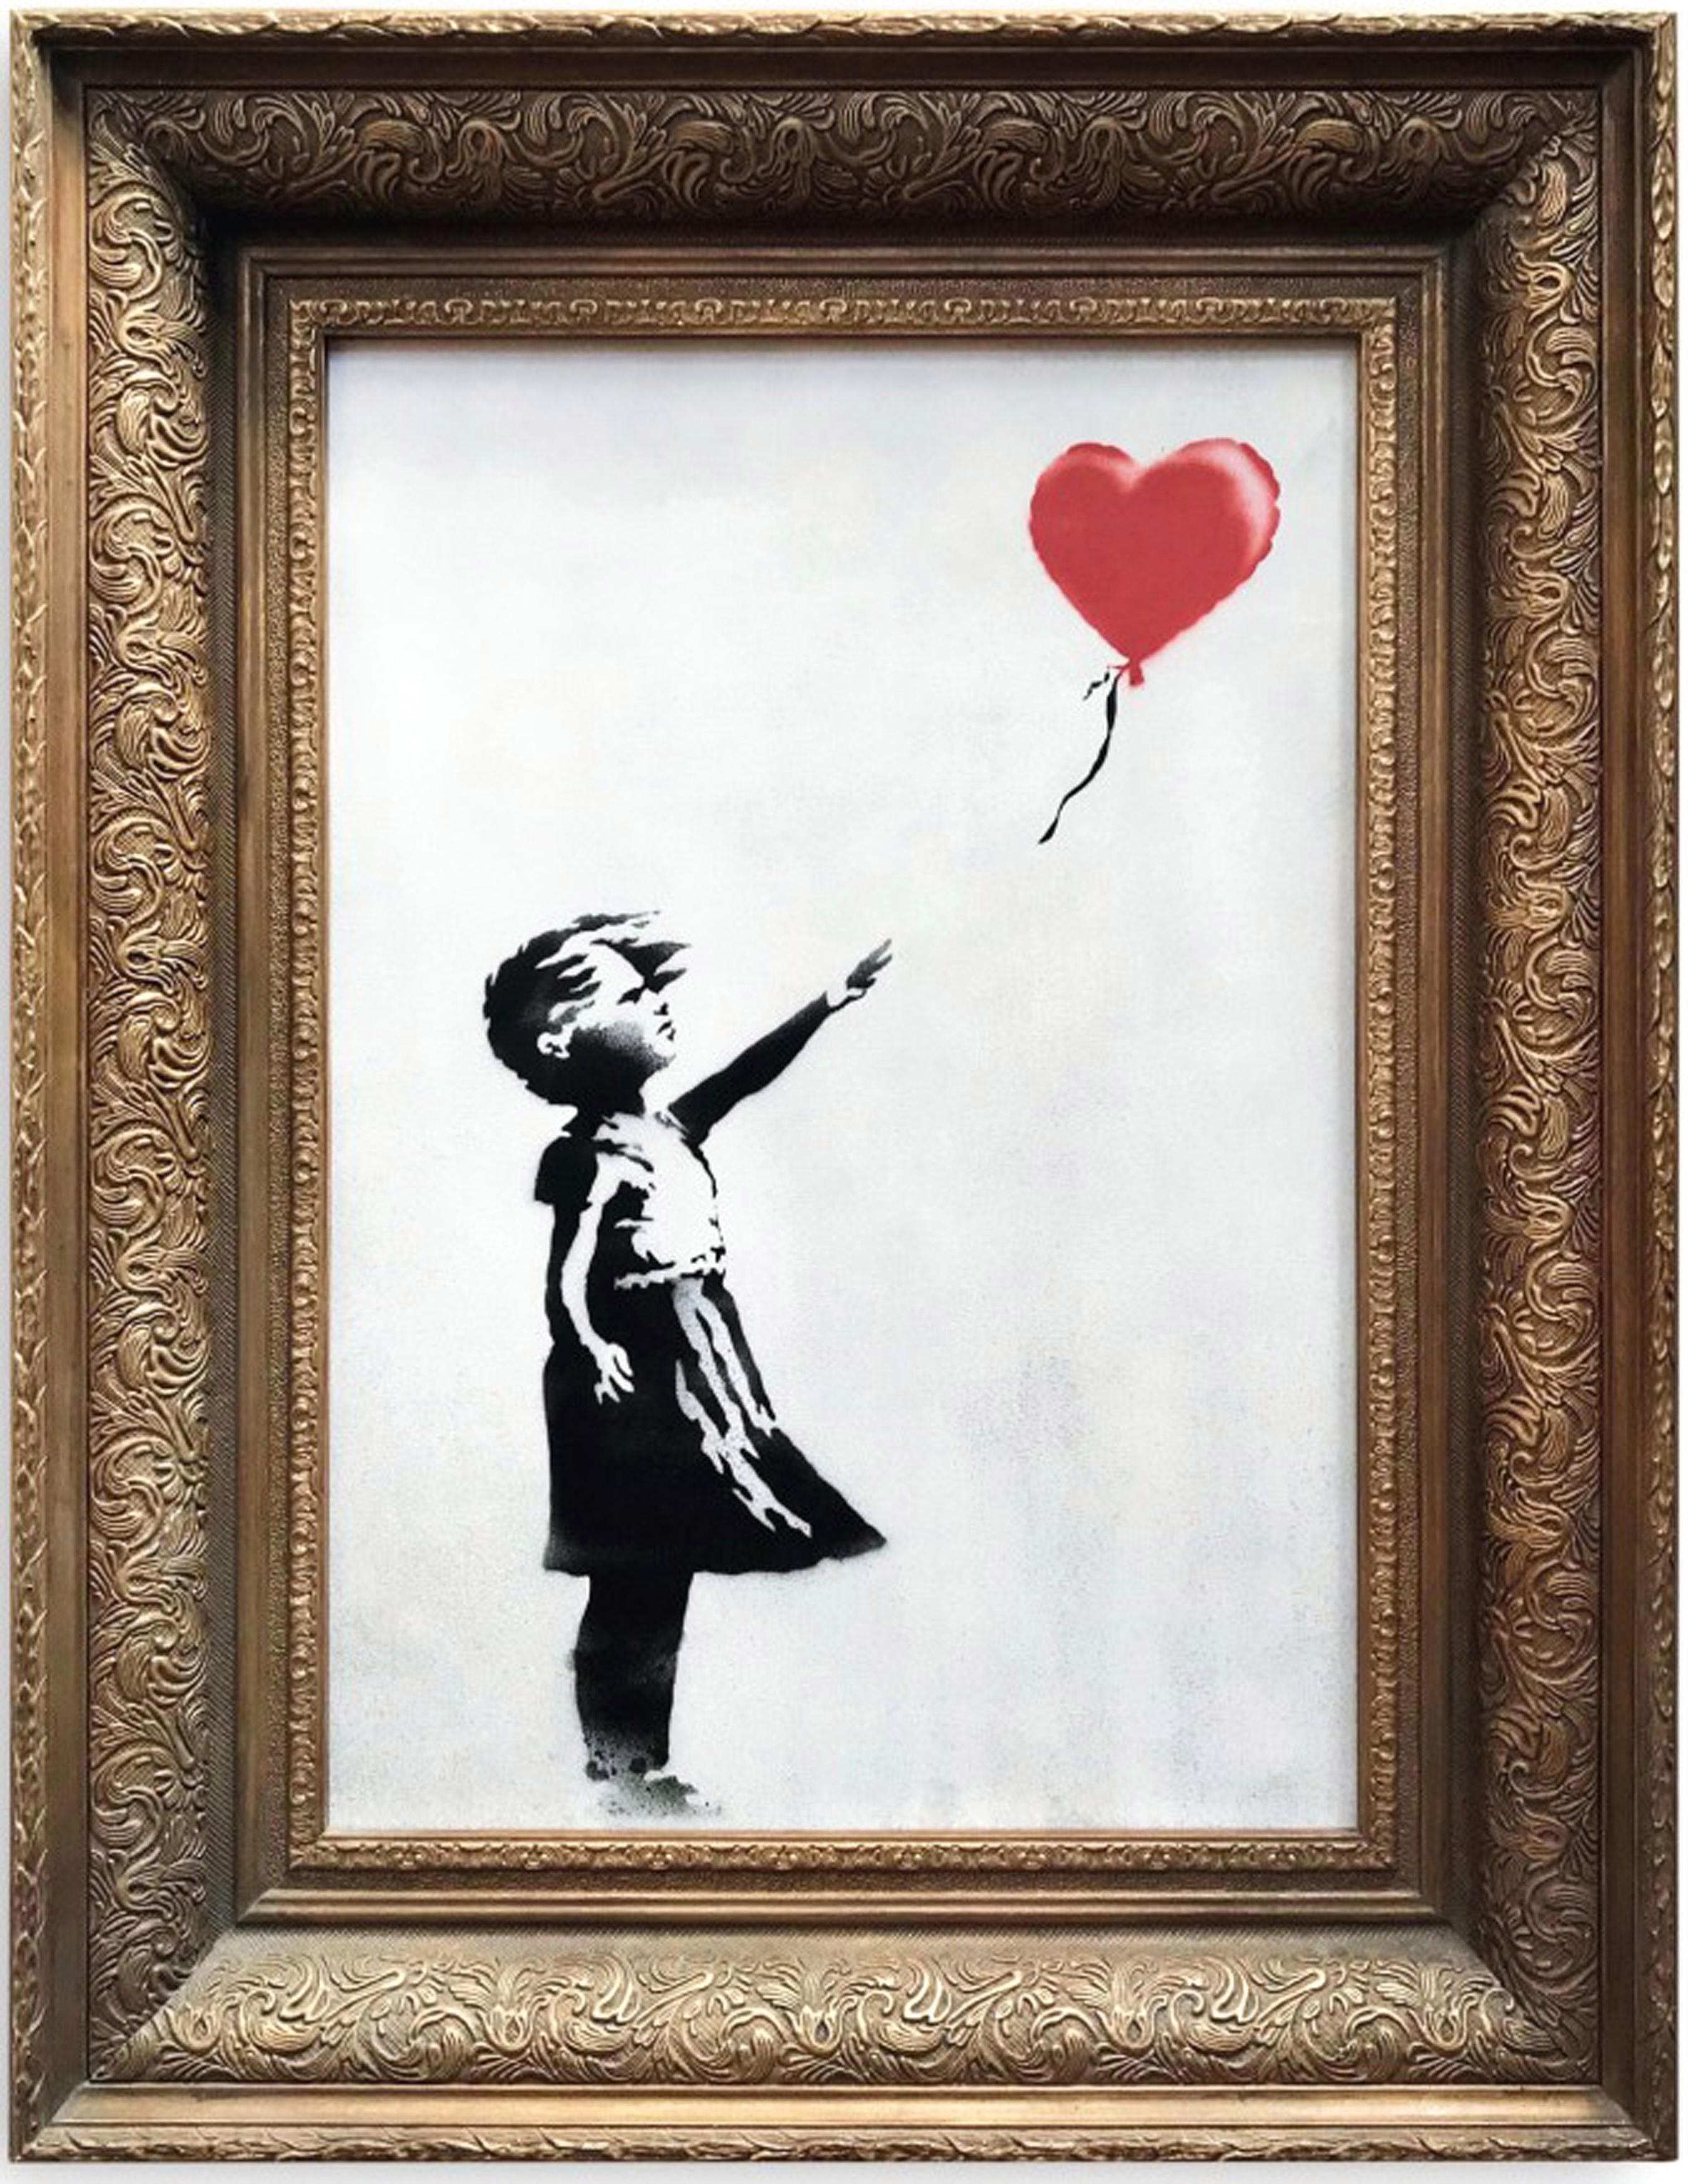 hybride Hoe dan ook volwassen How did Banksy's Girl with Balloon end up in a shredder?